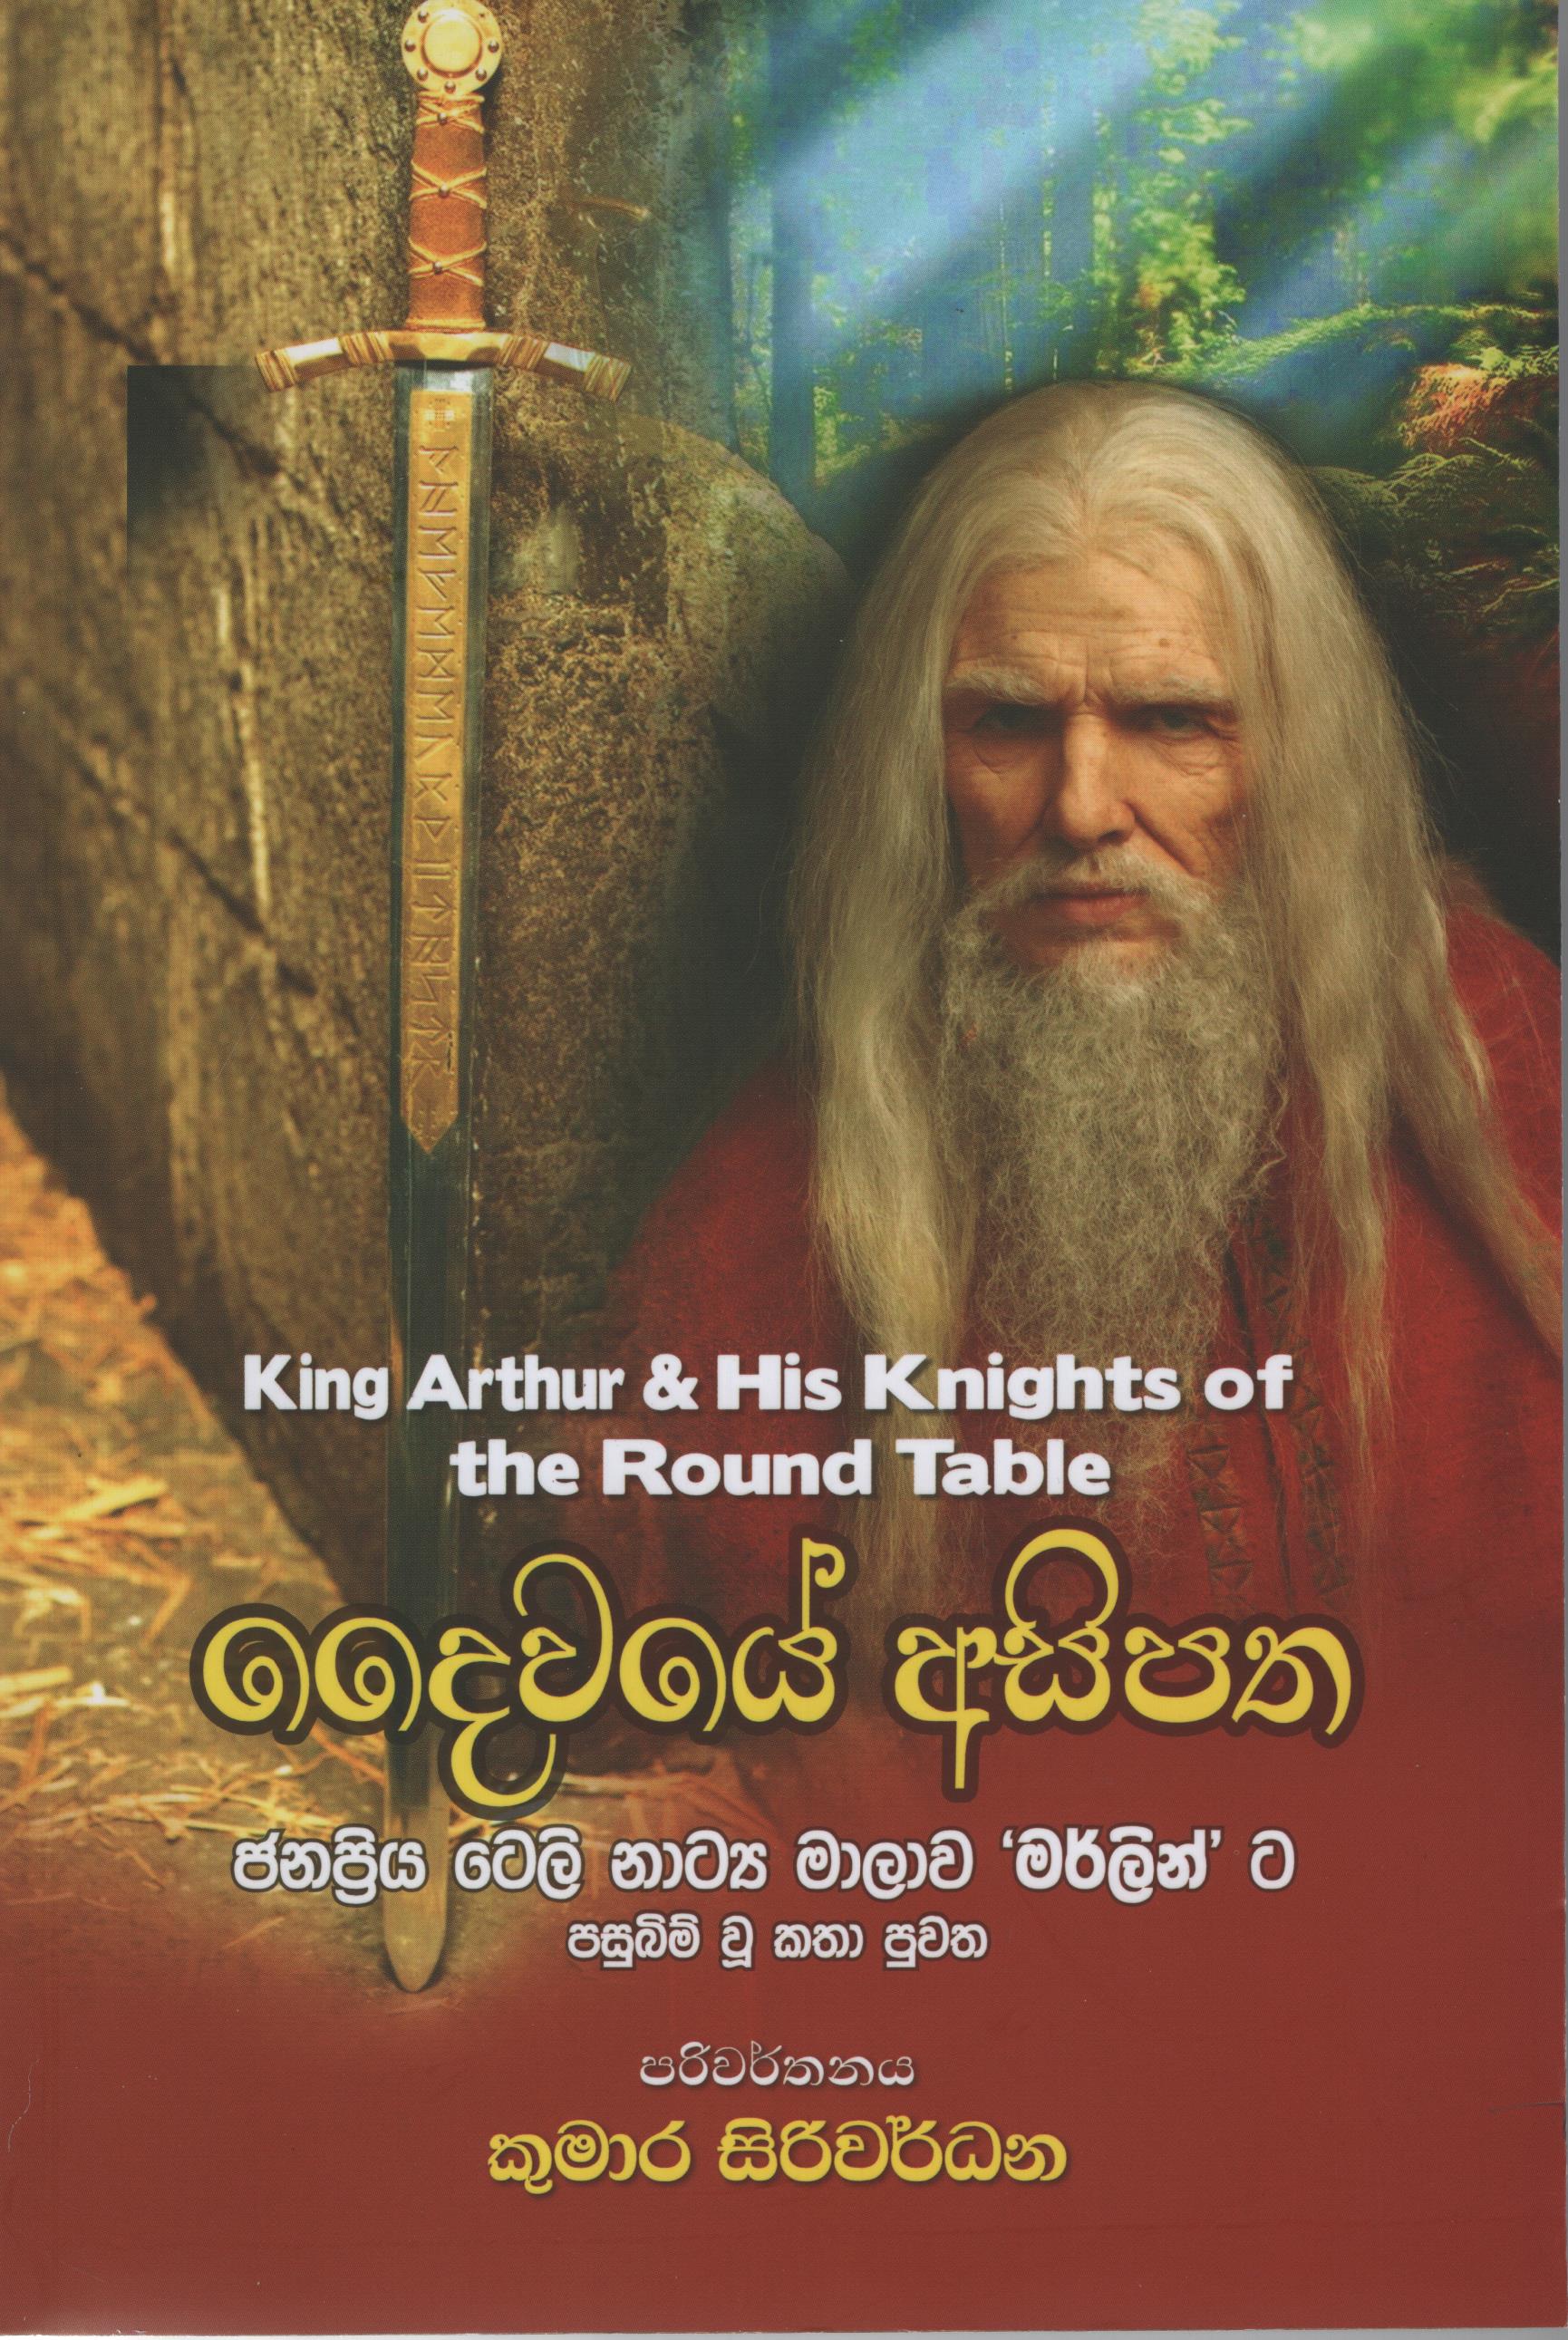 Daiwaye Asipatha - Translations of King Arthur and his knights of the round table 